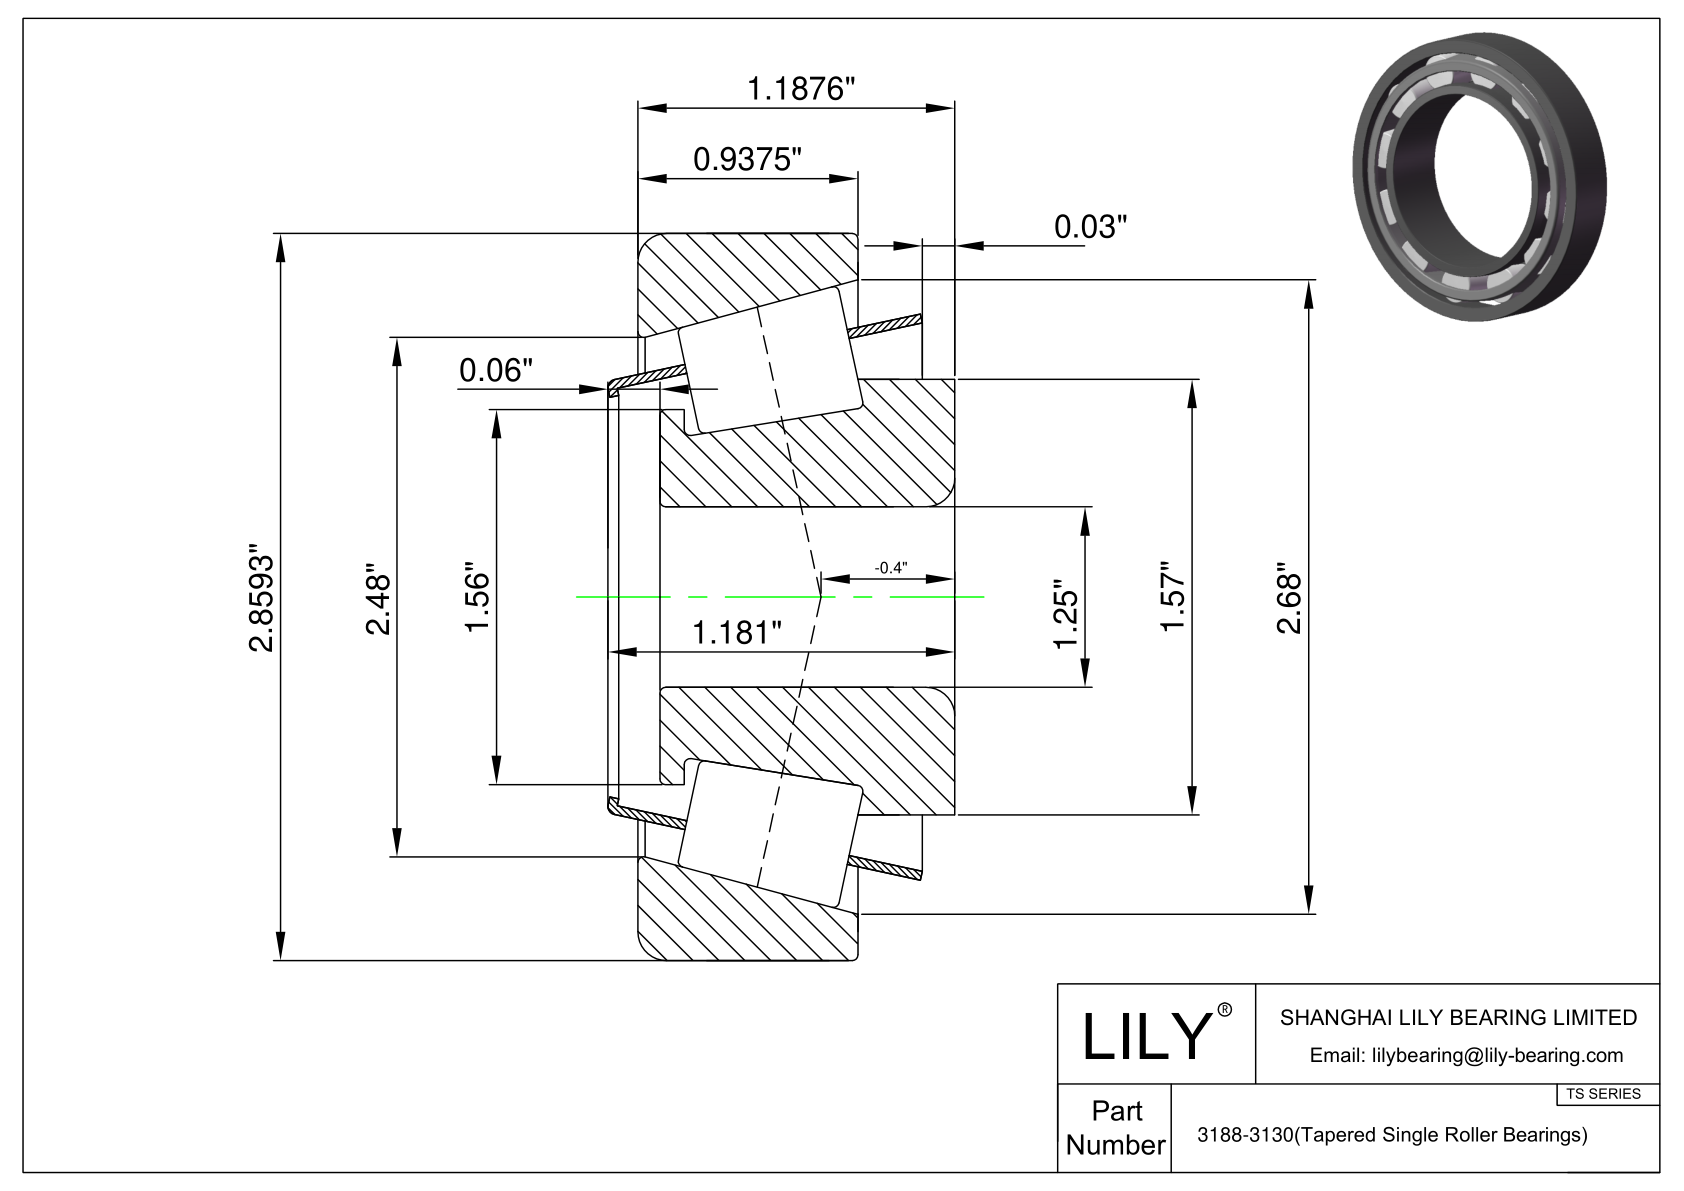 3188-3130 TS (Tapered Single Roller Bearings) (Imperial) cad drawing